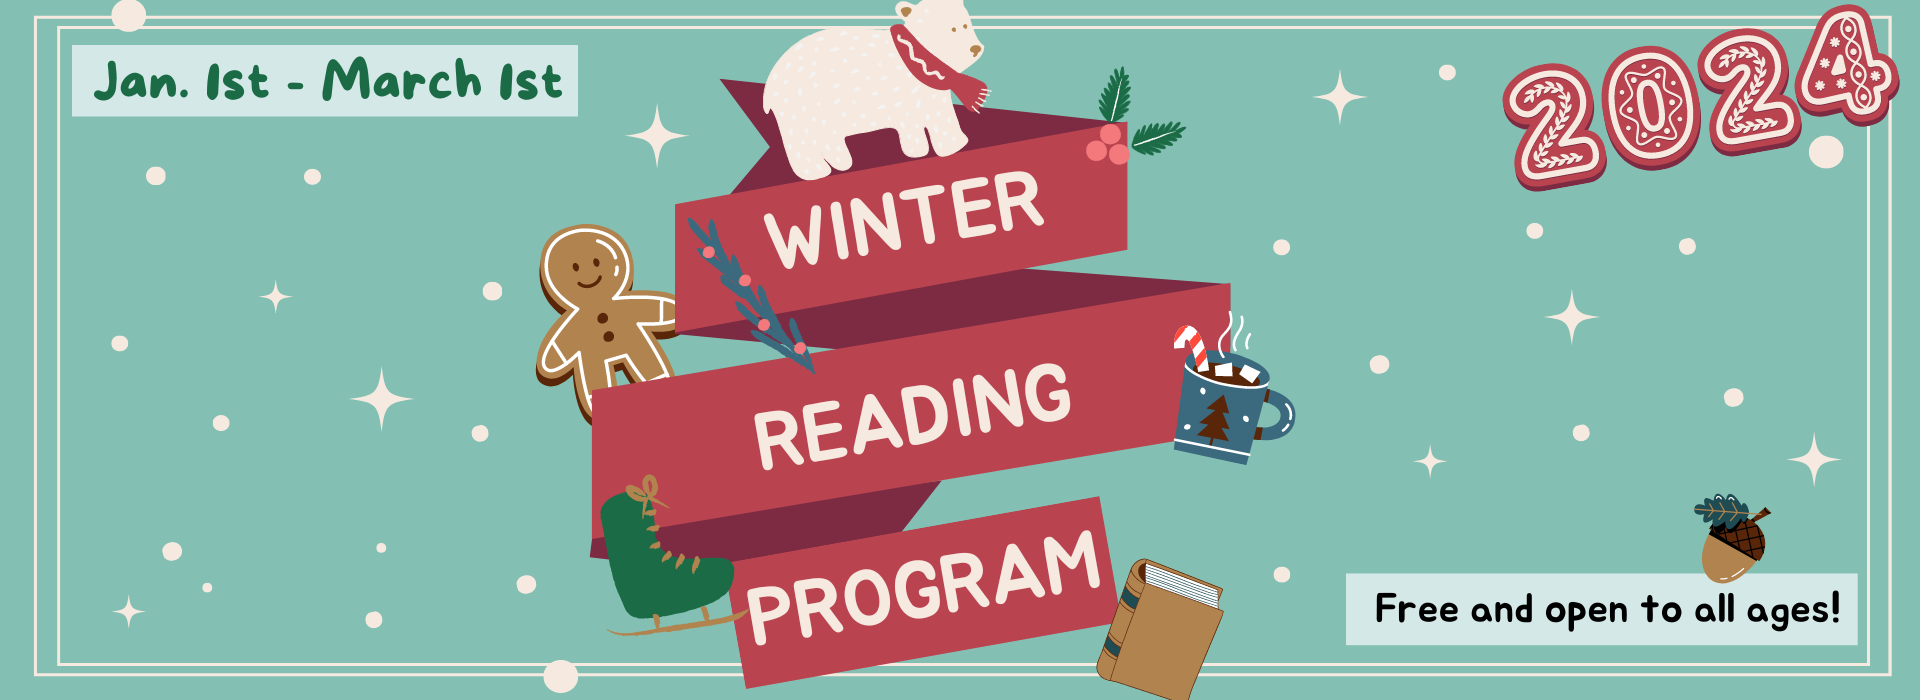 Winter Reading Program starts January 1st and ends March 1st